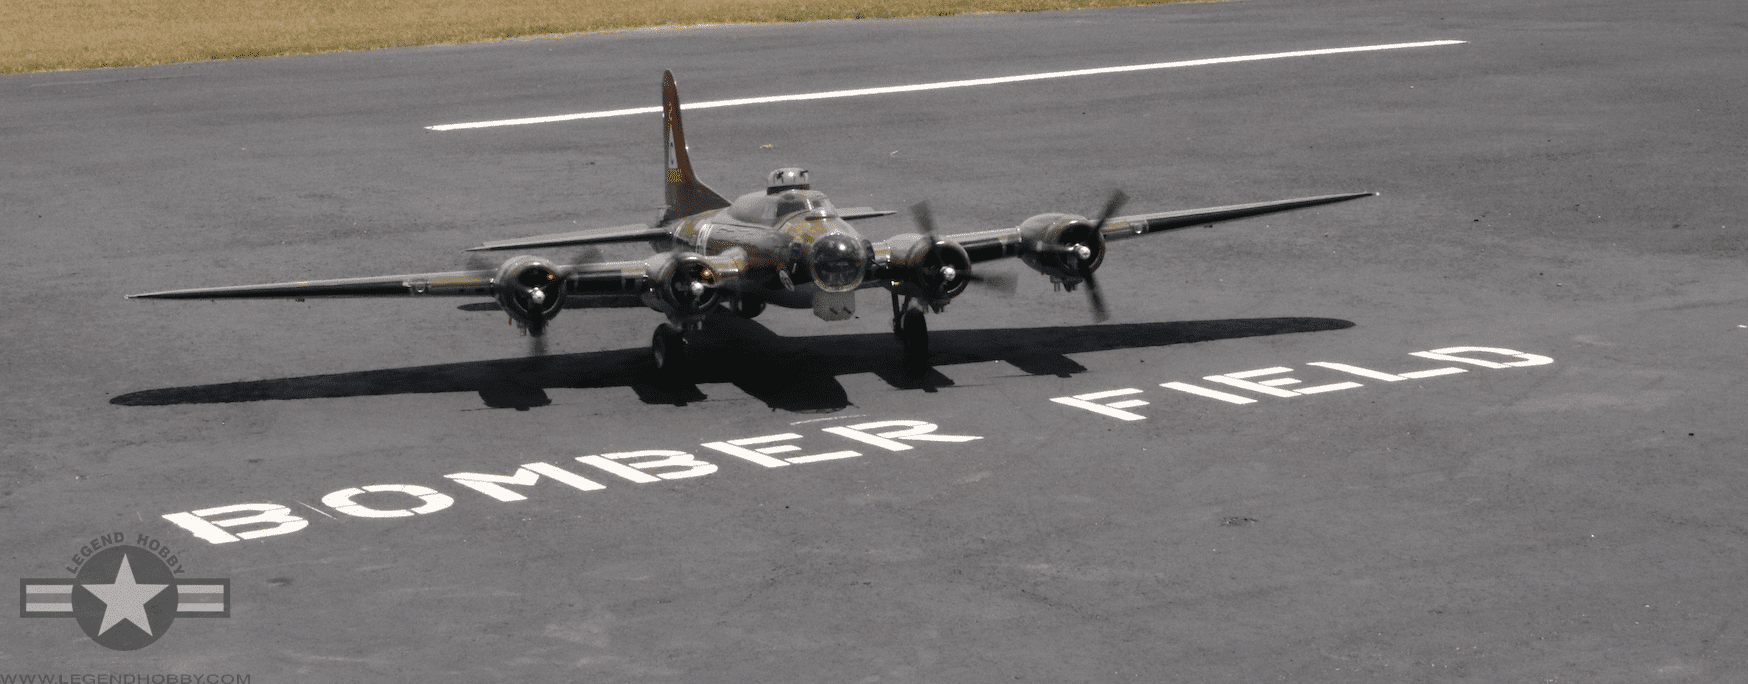 B-17 Flying Fortress 125